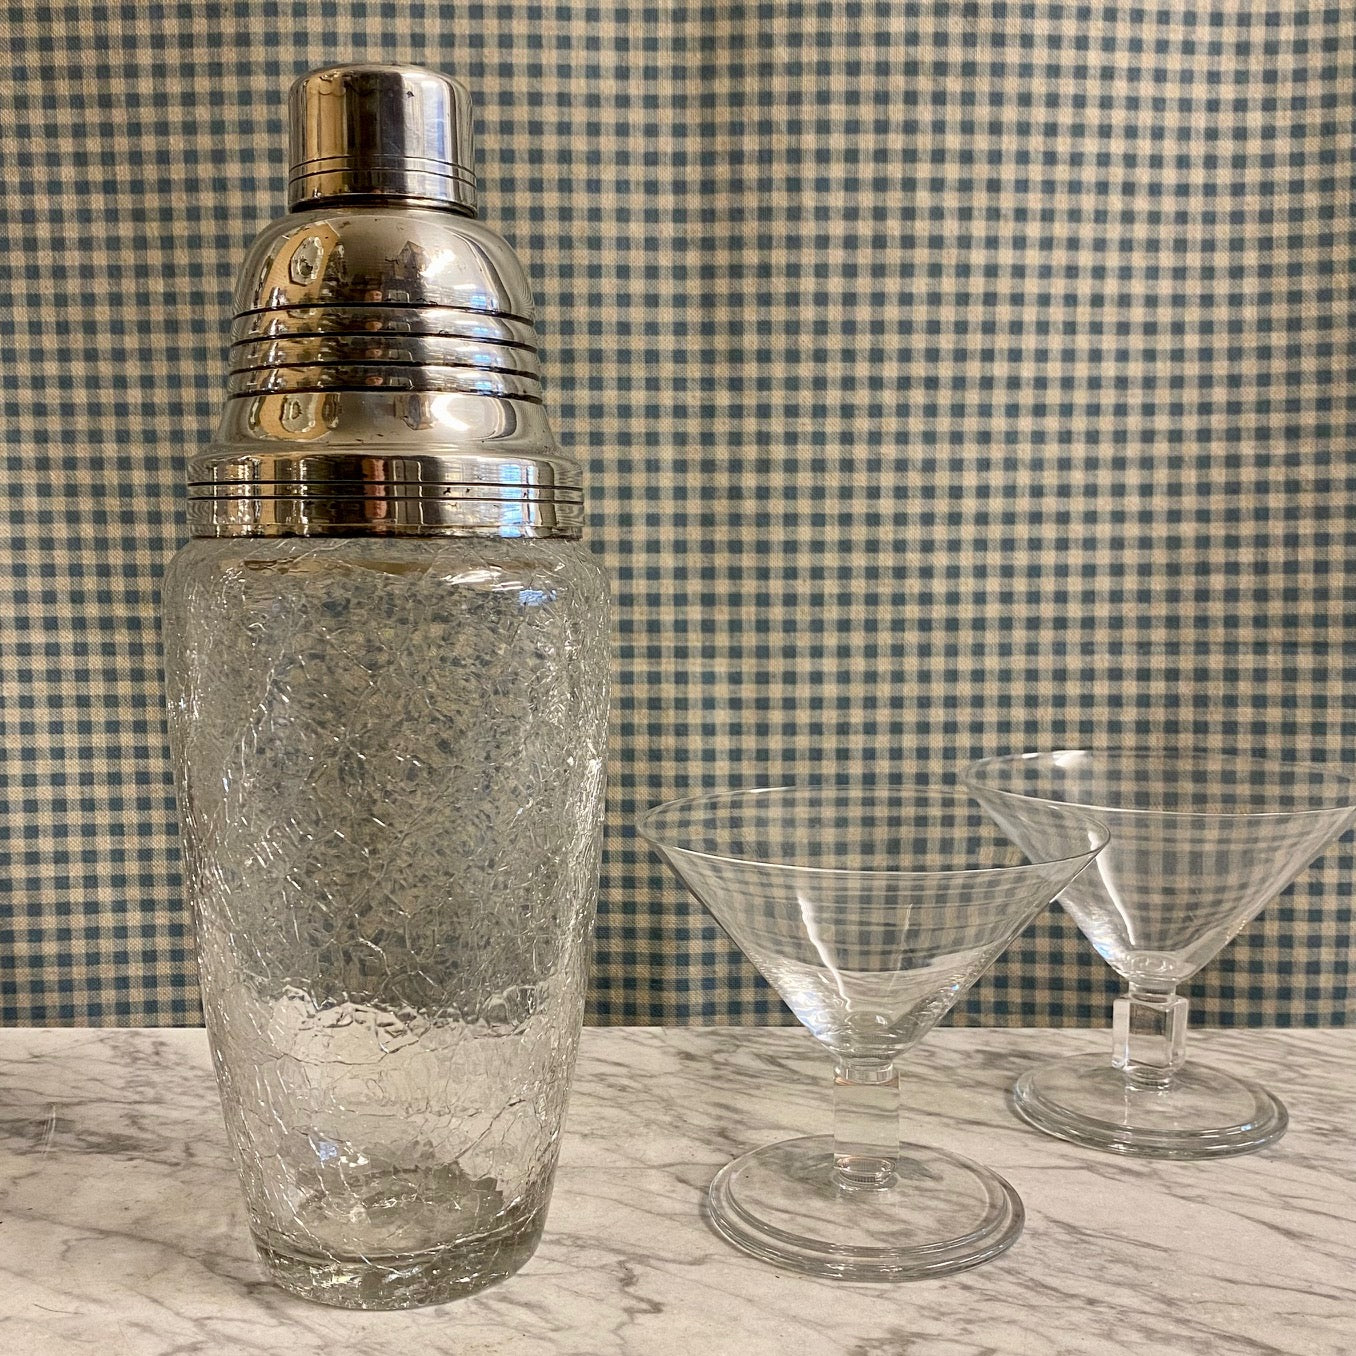 U16 VINTAGE MID CENTURY CRACKLED GLASS SILVER PLATED COCKTAIL SHAKER